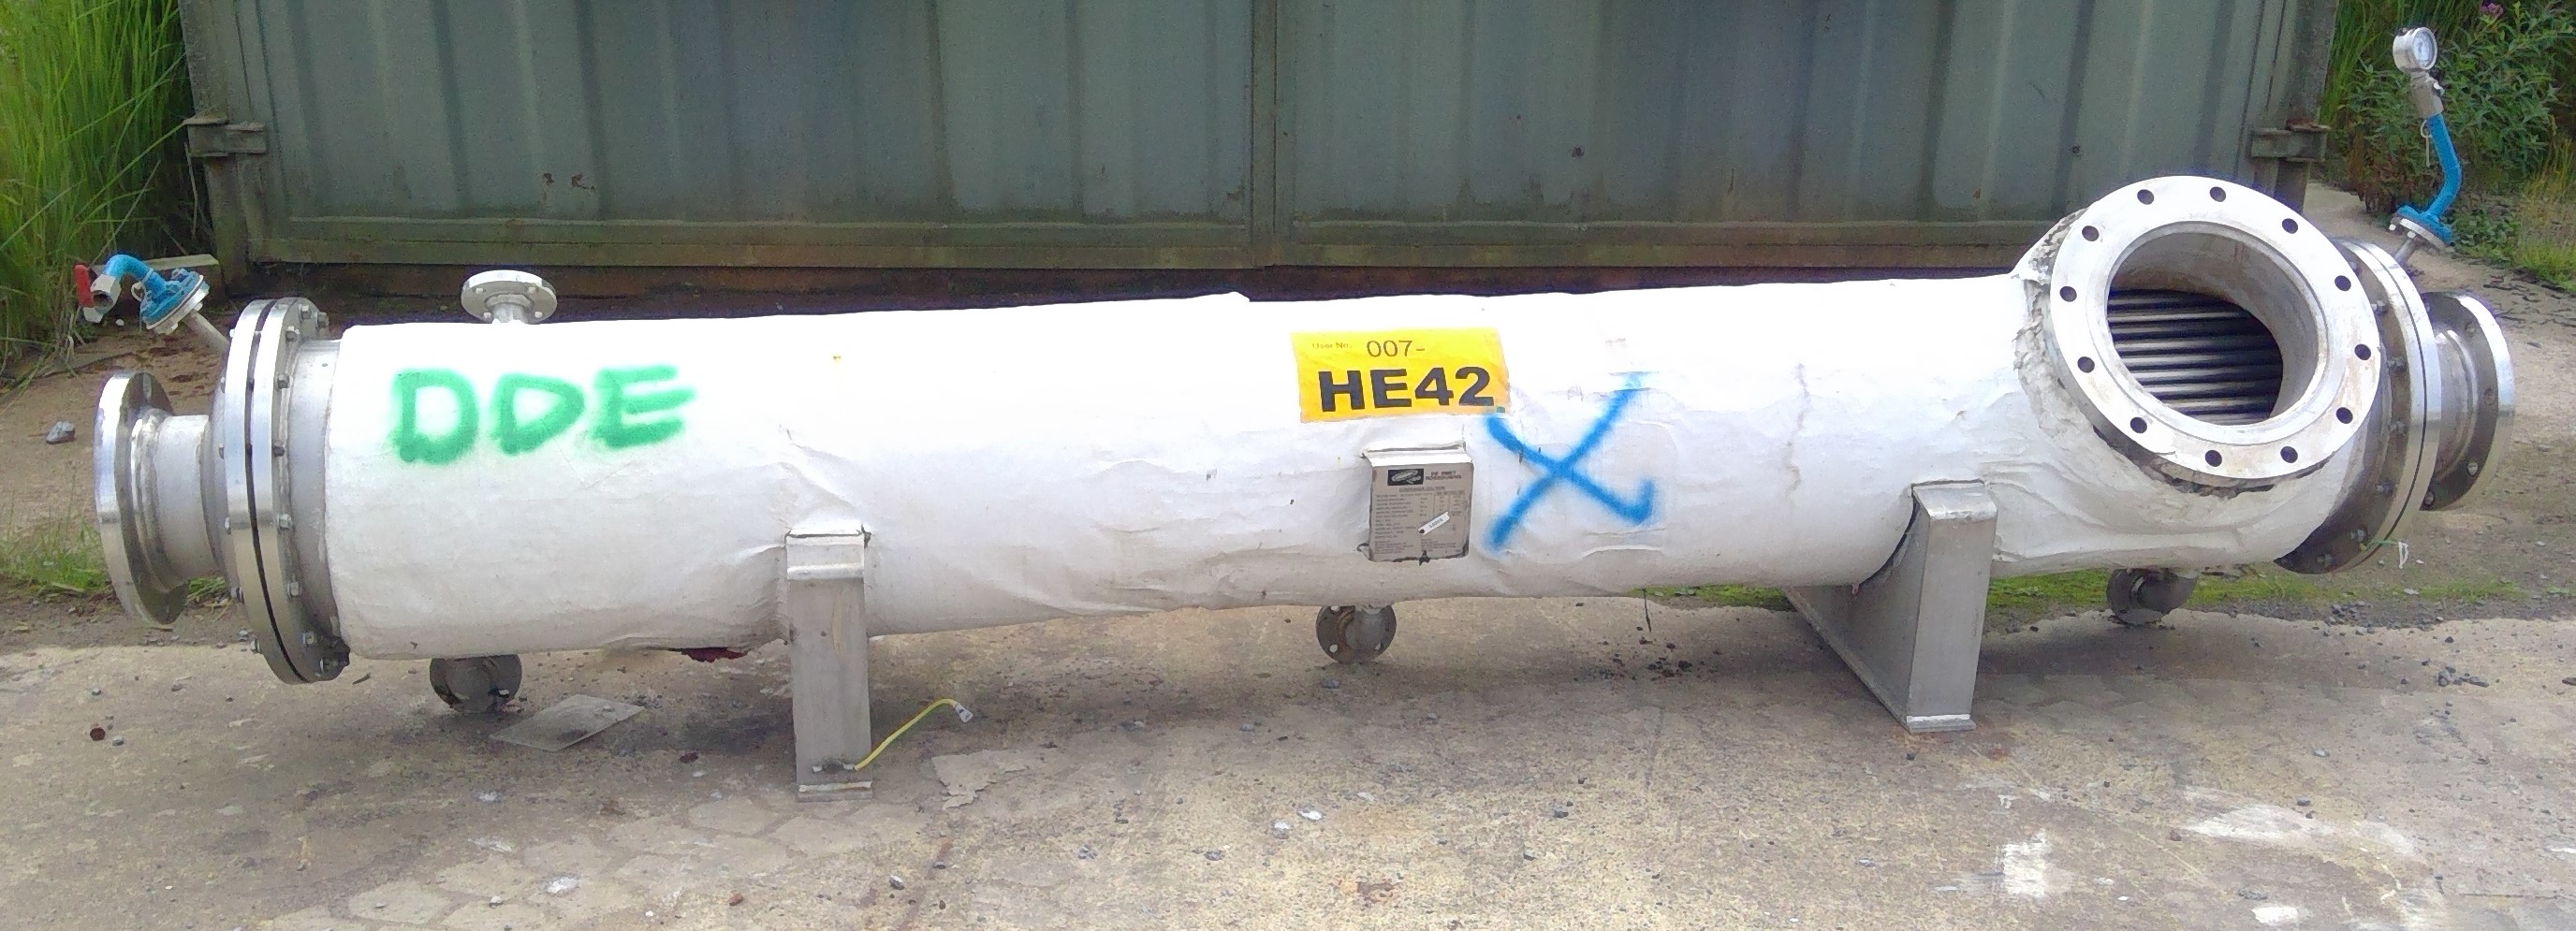 29 Sq. M. Desmet Shell and Tube Heat Exchanger.